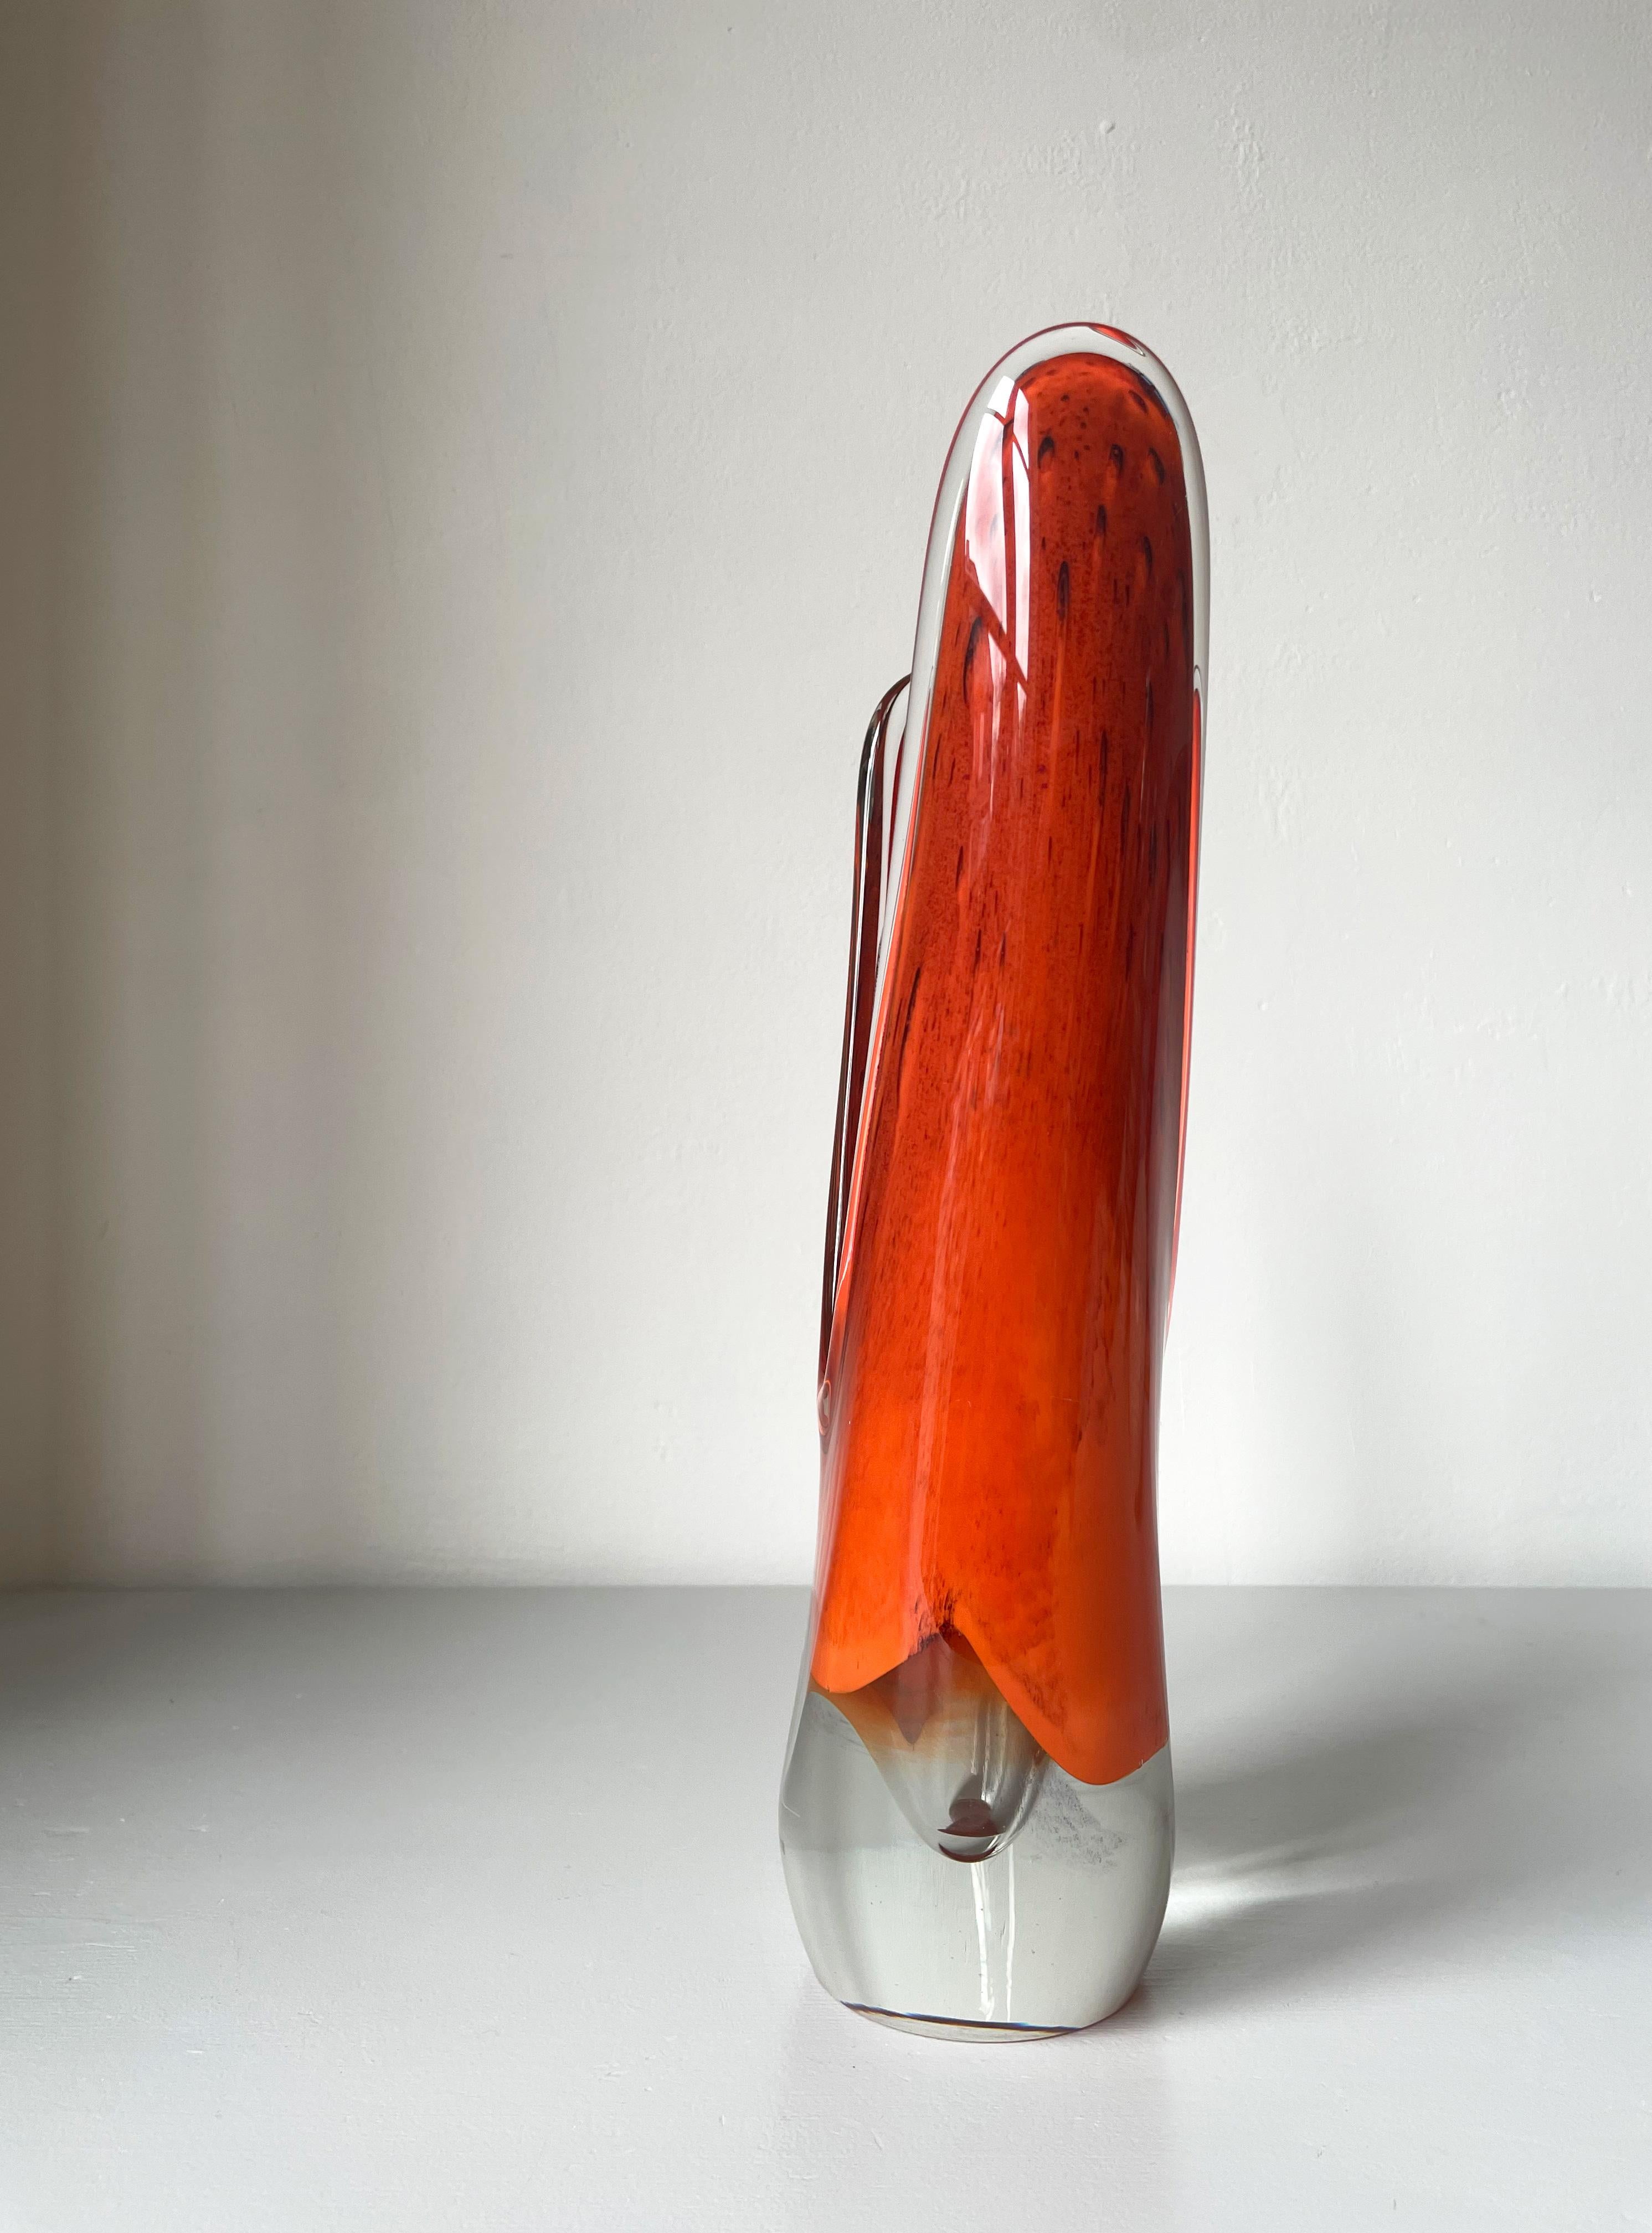 Hand-Crafted Large Sculptural Mouth-Blown 1950s Orange Art Glass Vase, Scandinavia